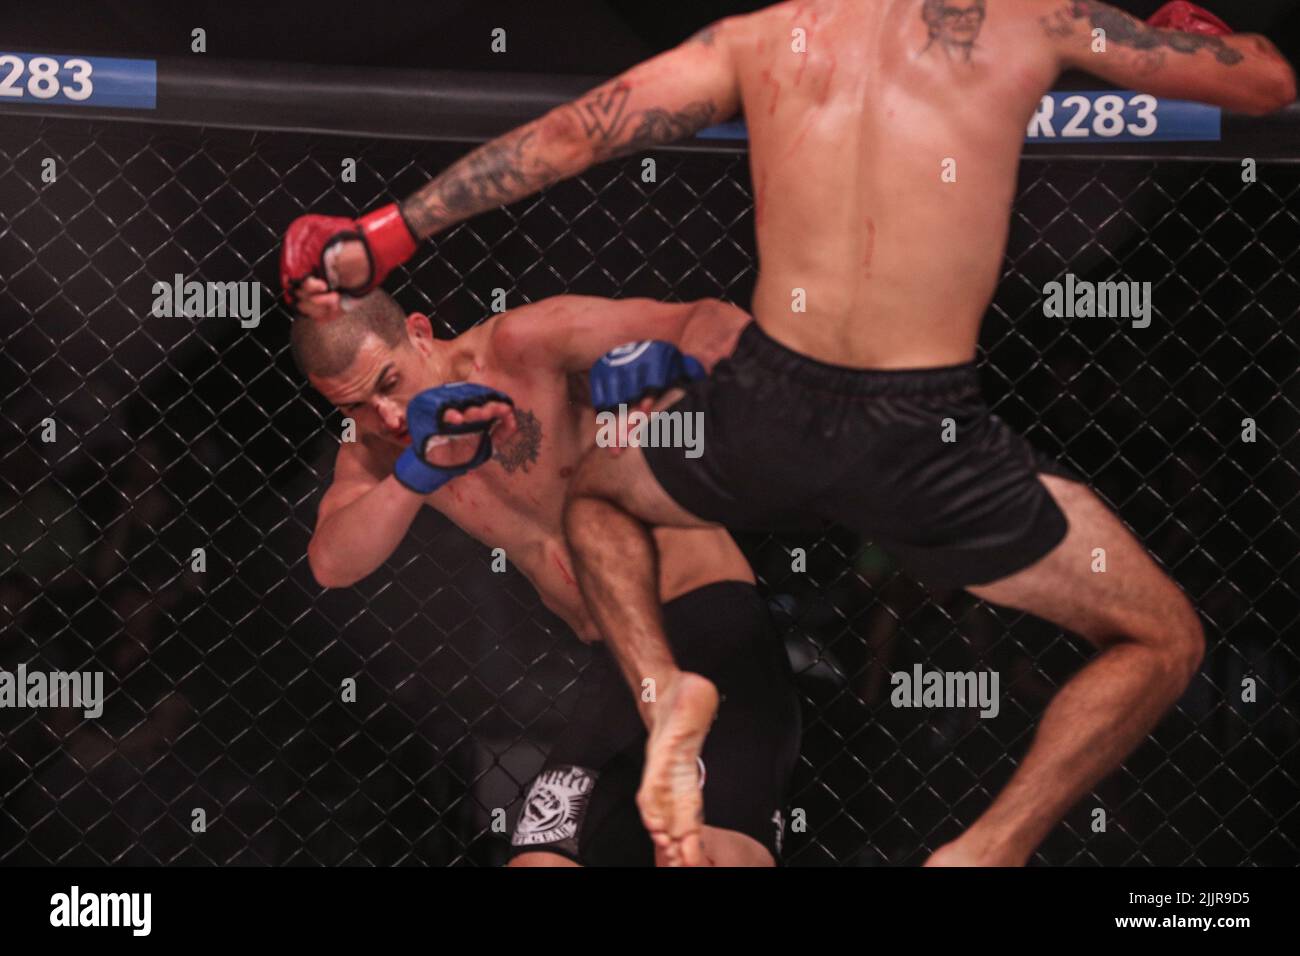 Roman Faraldo attacks Luis Iniguez with a flying knee at Bellator 283. Roman Faraldo wins by knock out in the first round from the Emerald Queen Casin Stock Photo